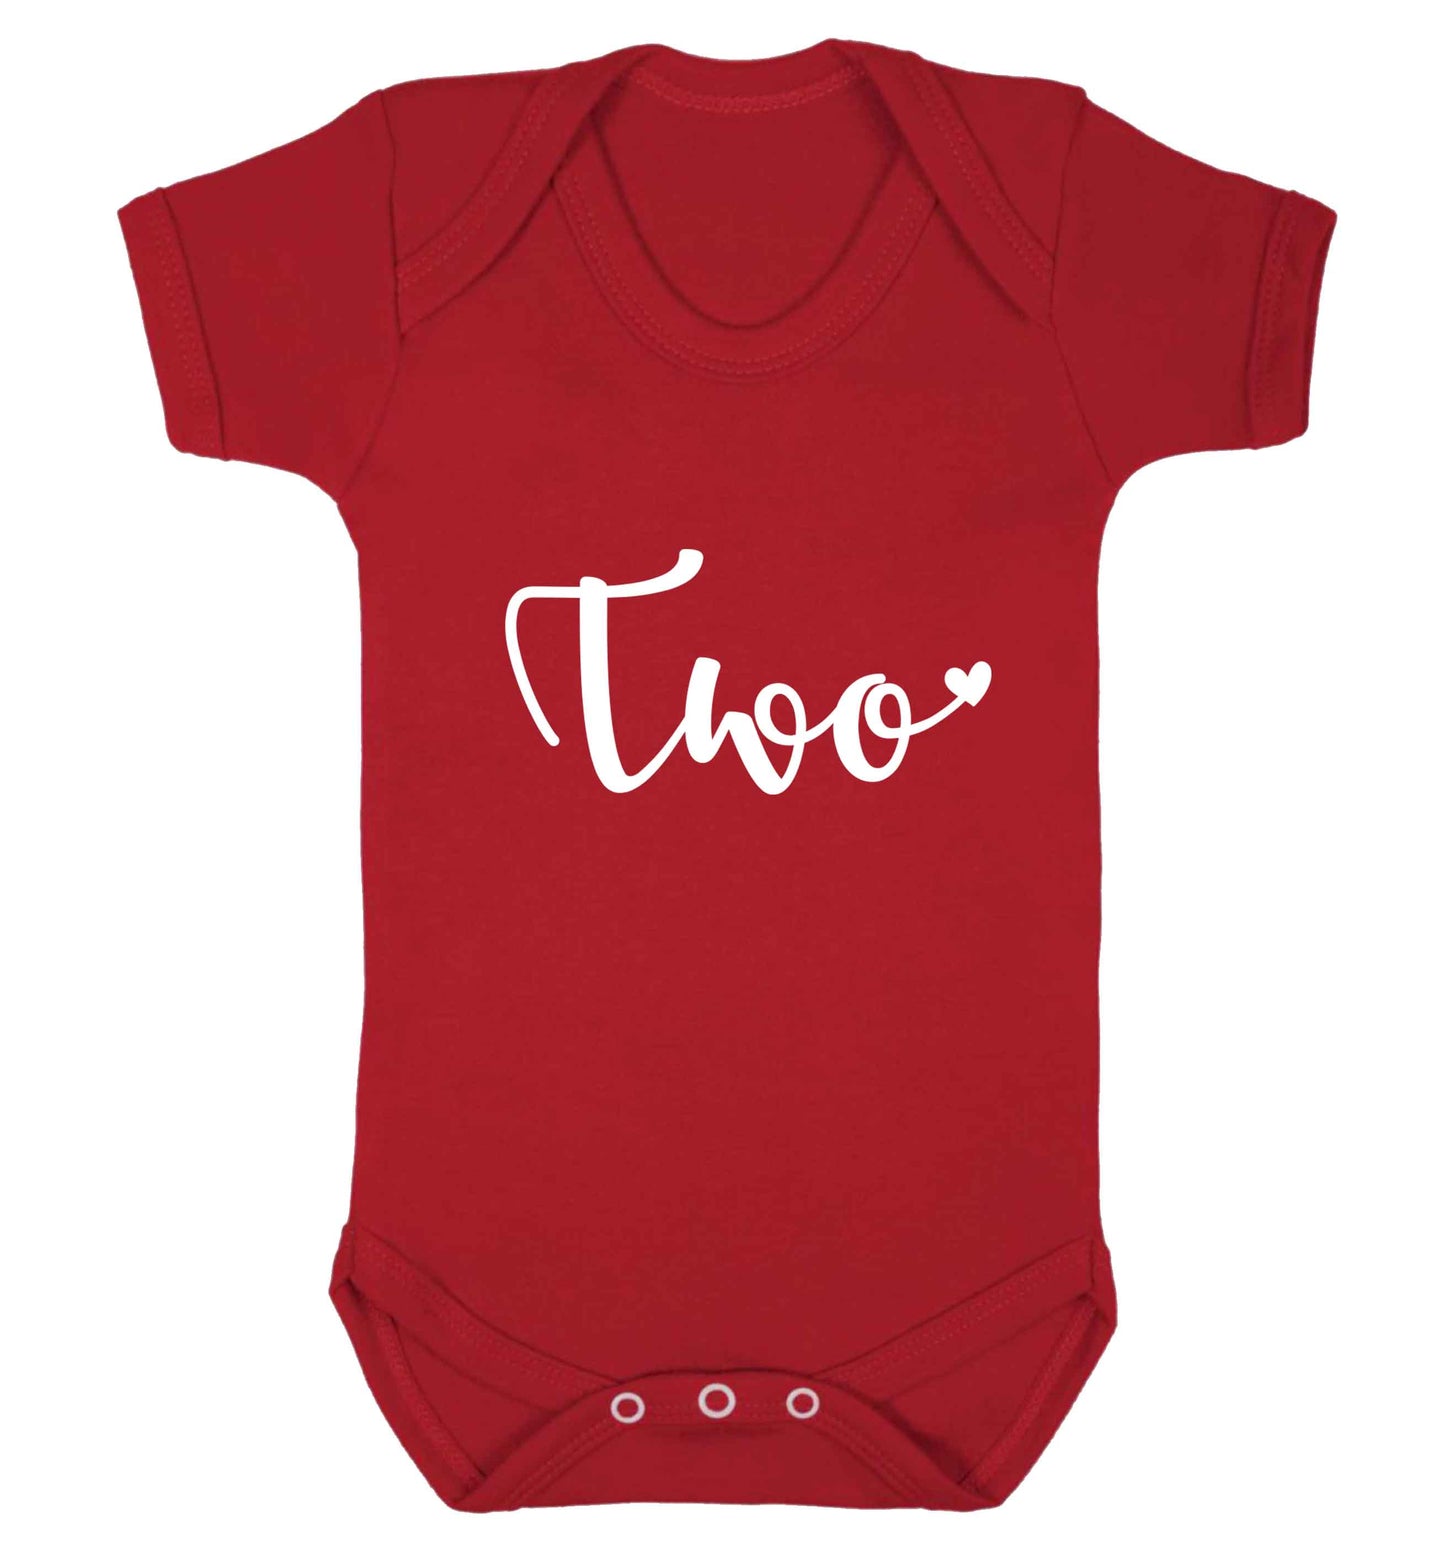 Two and Heart baby vest red 18-24 months